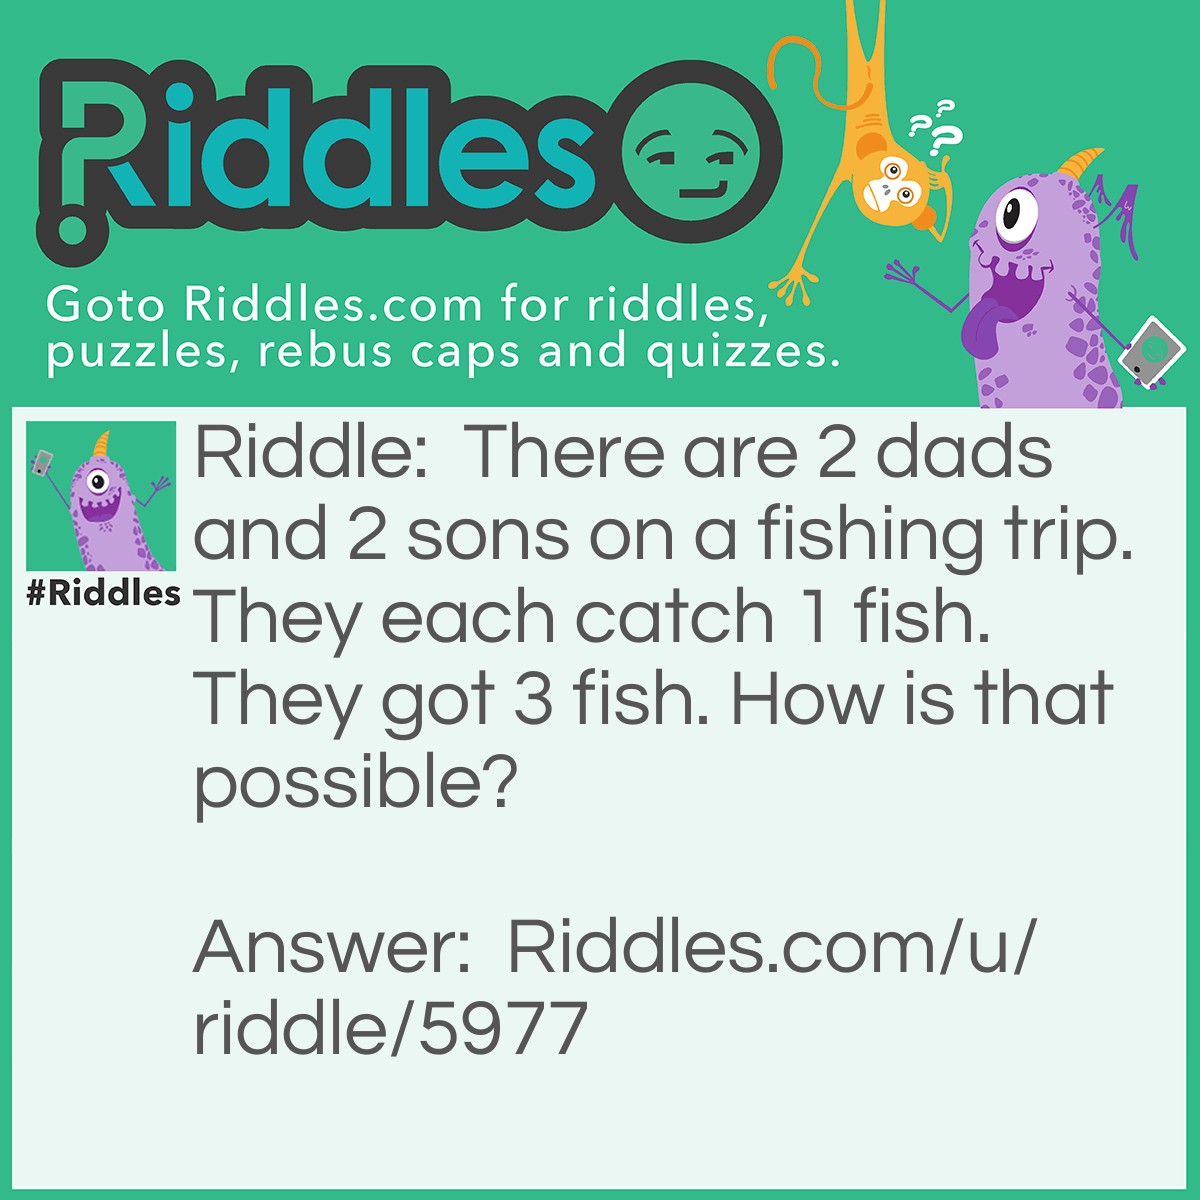 Riddle: There are 2 dads and 2 sons on a fishing trip. They each catch 1 fish. They got 3 fish. How is that possible? Answer: There is a grandpa, who is the dad of the dad, and the dad is the dad of the son. The dad is the sun of grandpa and the son is the son of the dad.